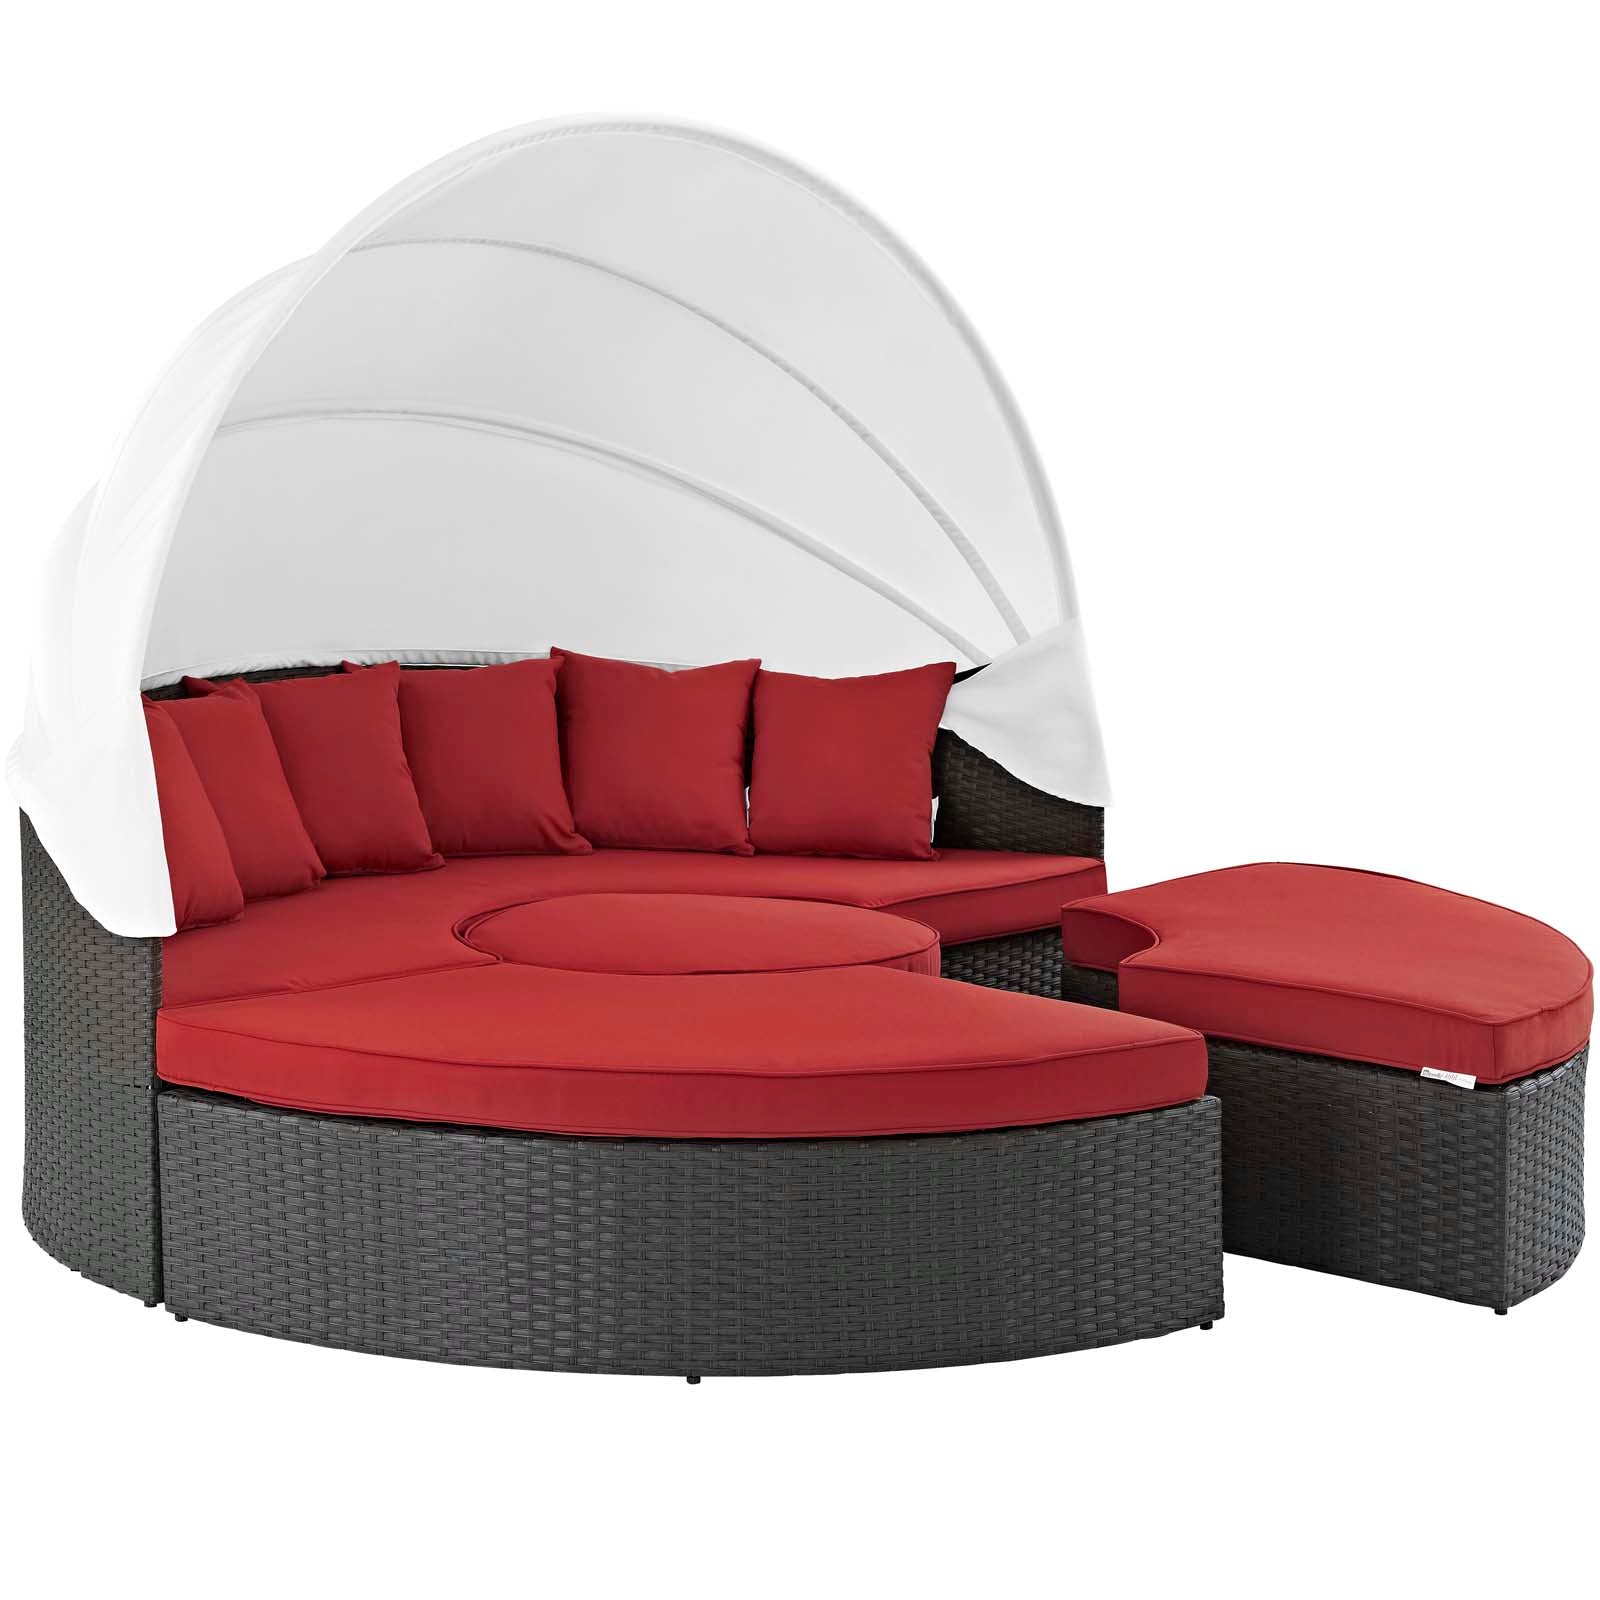 Sojourn Outdoor Patio Sunbrella Daybed Canvas Red